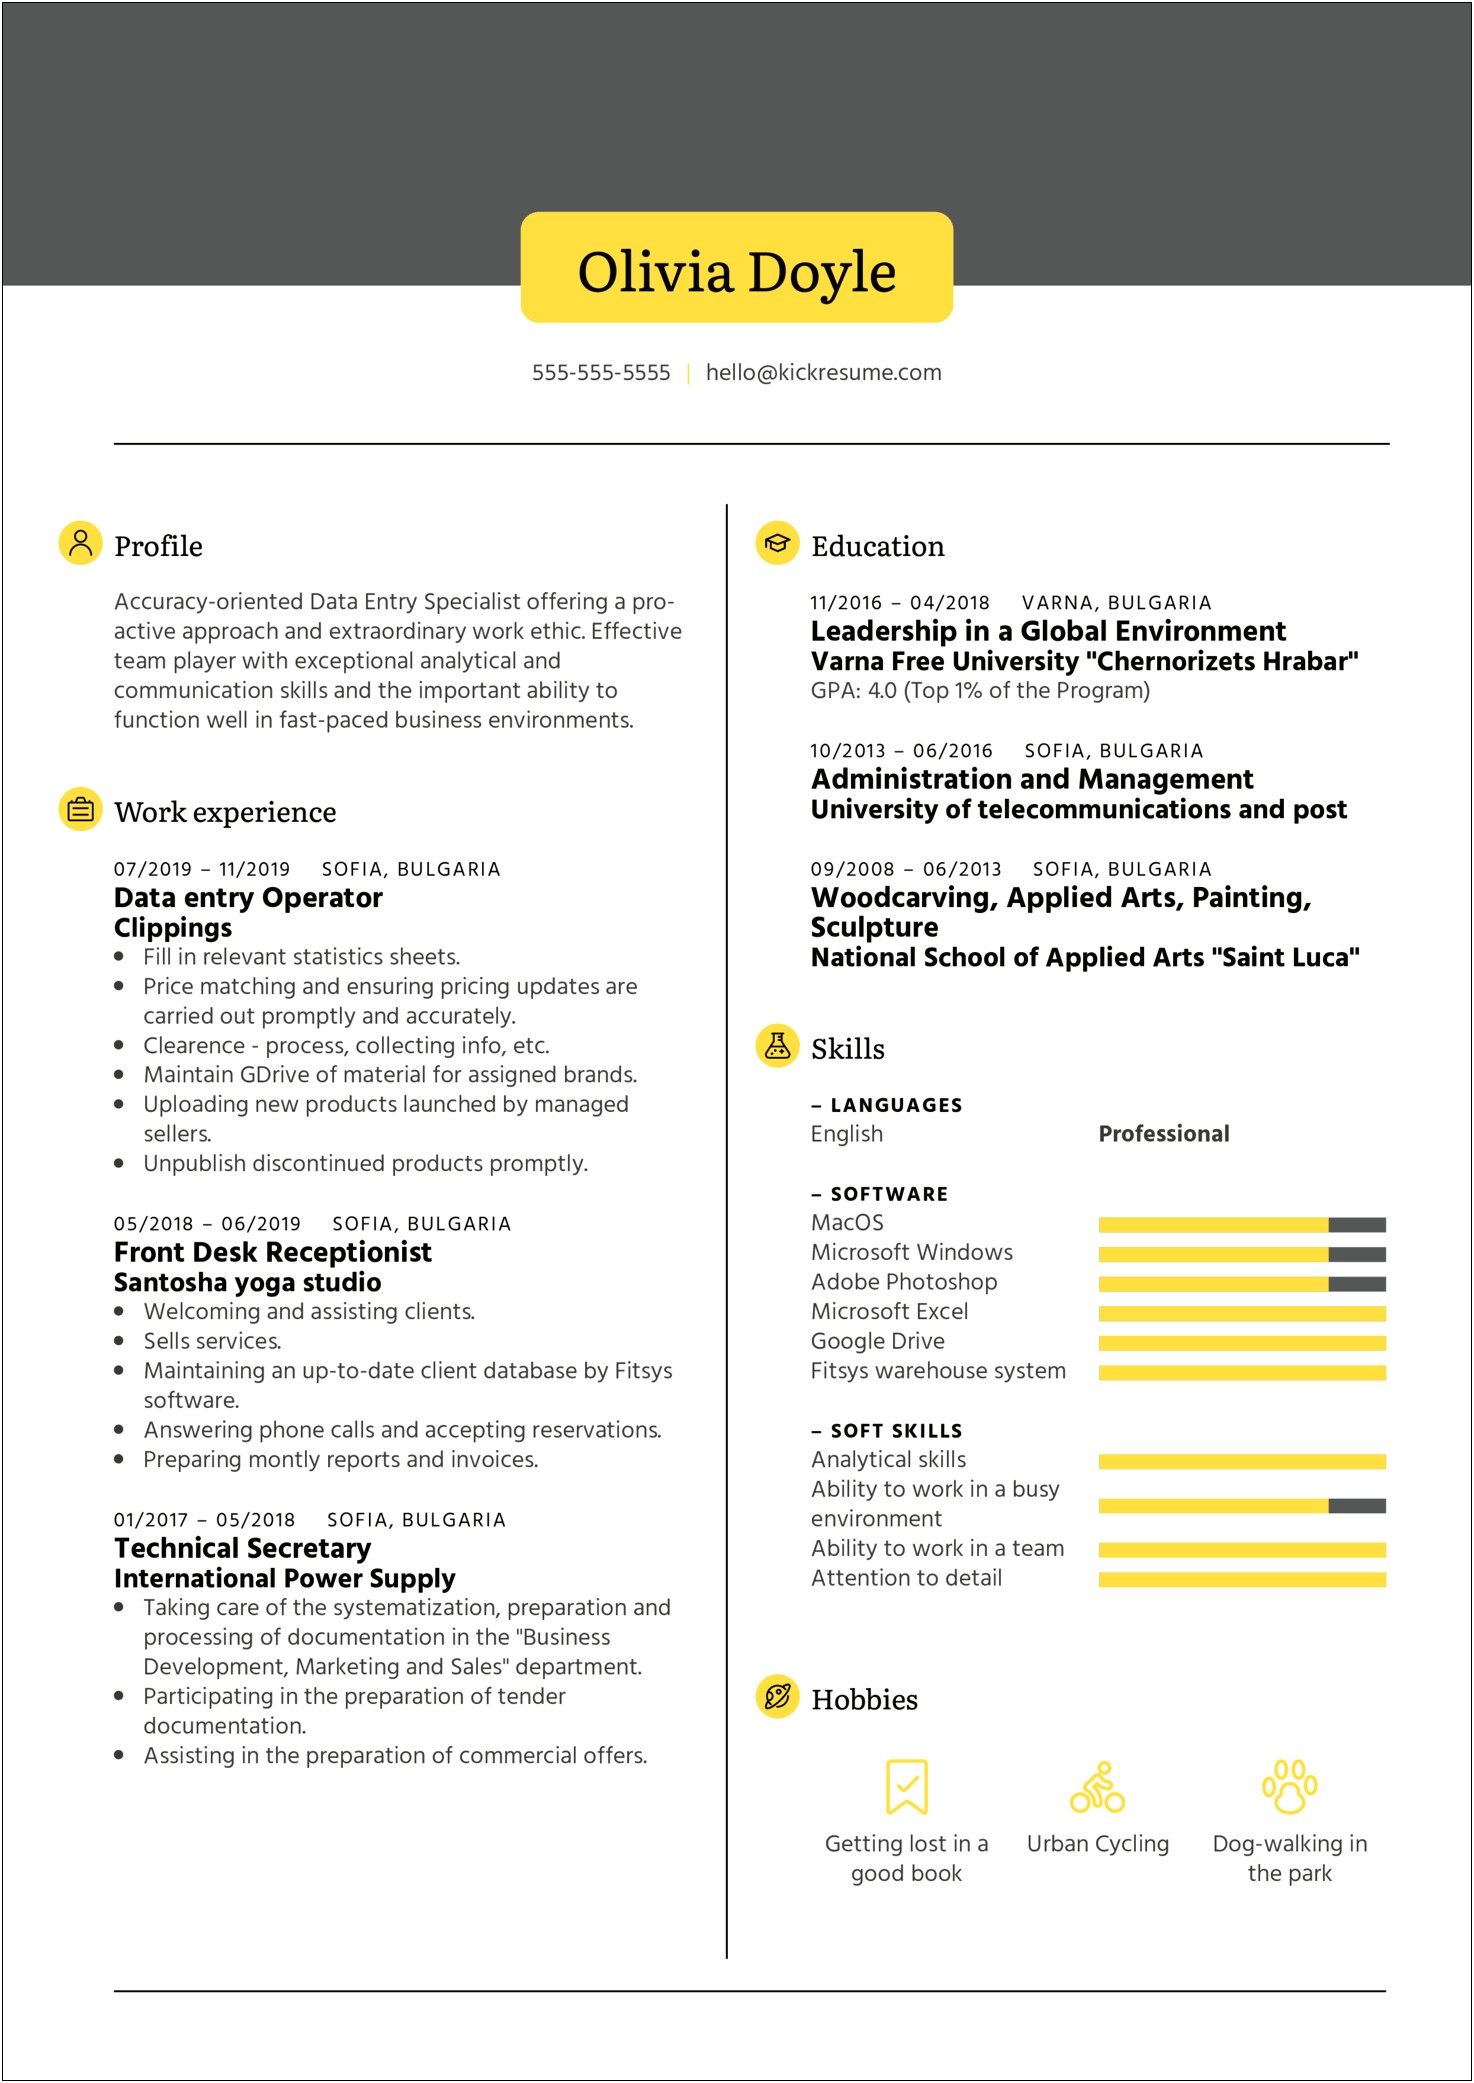 Resume Examples With Skills And Abilities